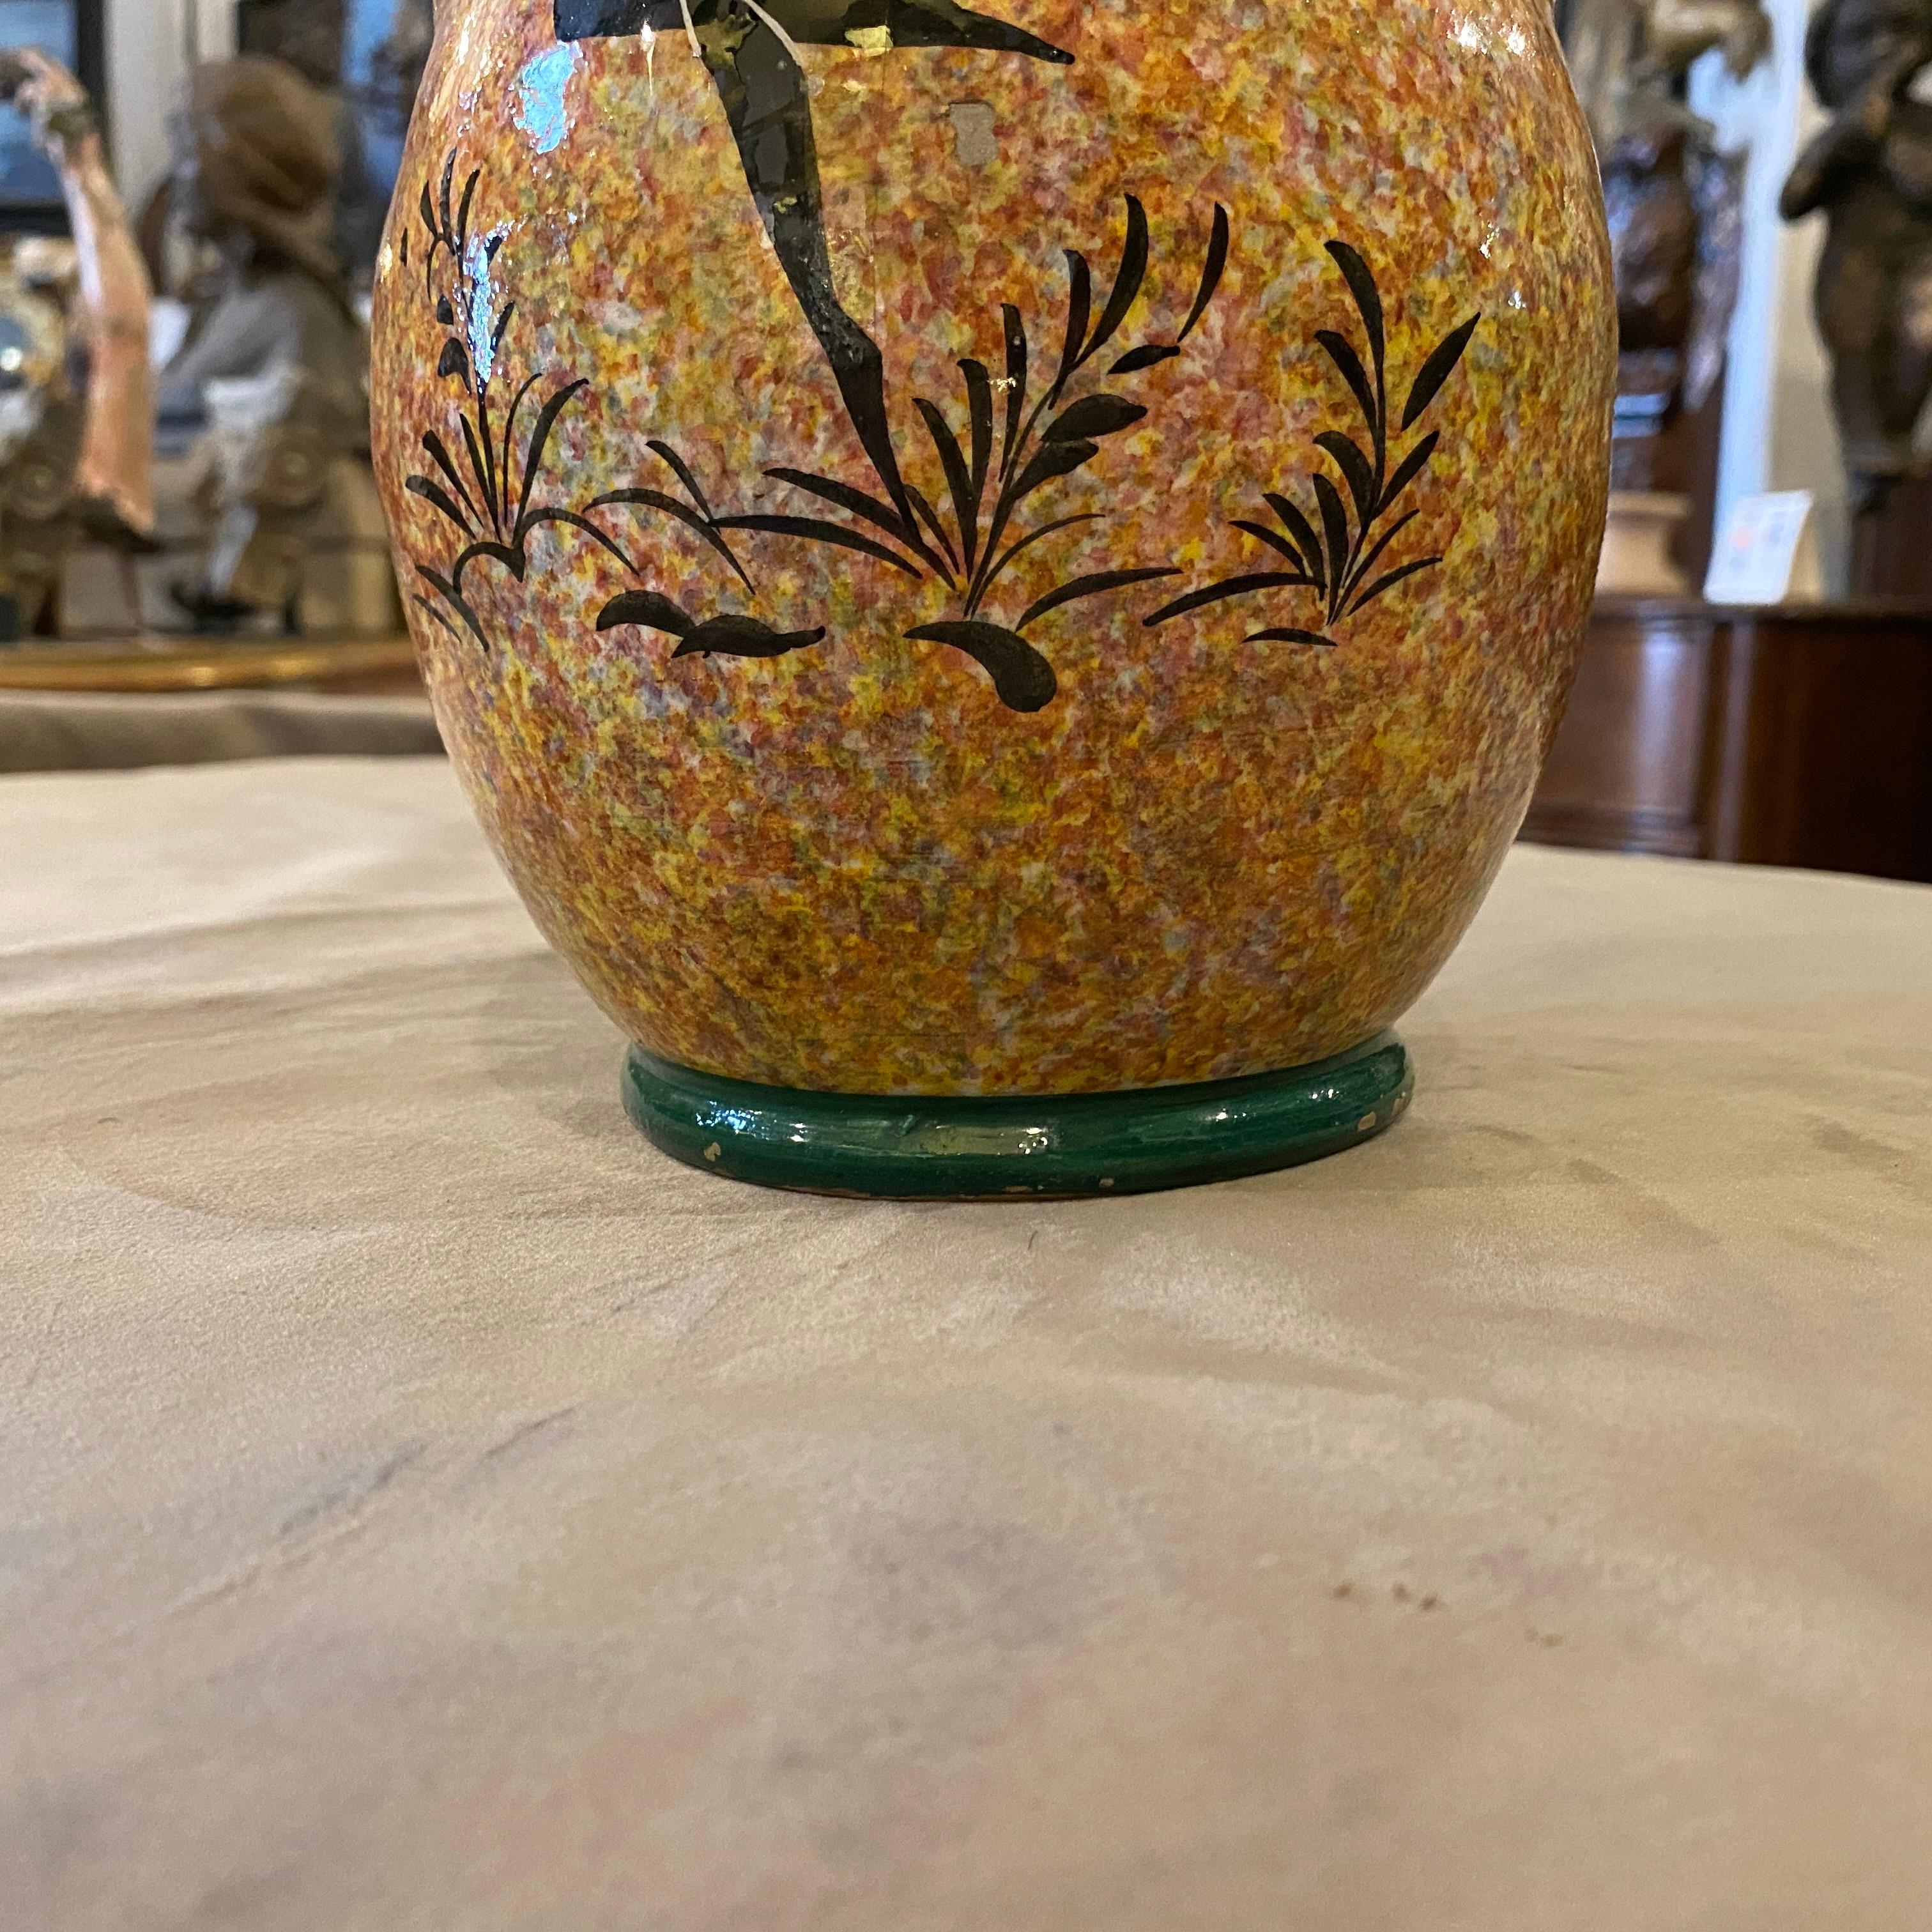 An Art Deco vase designed and manufactured in Italy in the Thirties by Bitossi. The vase has a dancer figure decoration. It has signs of use and age visible on the photos